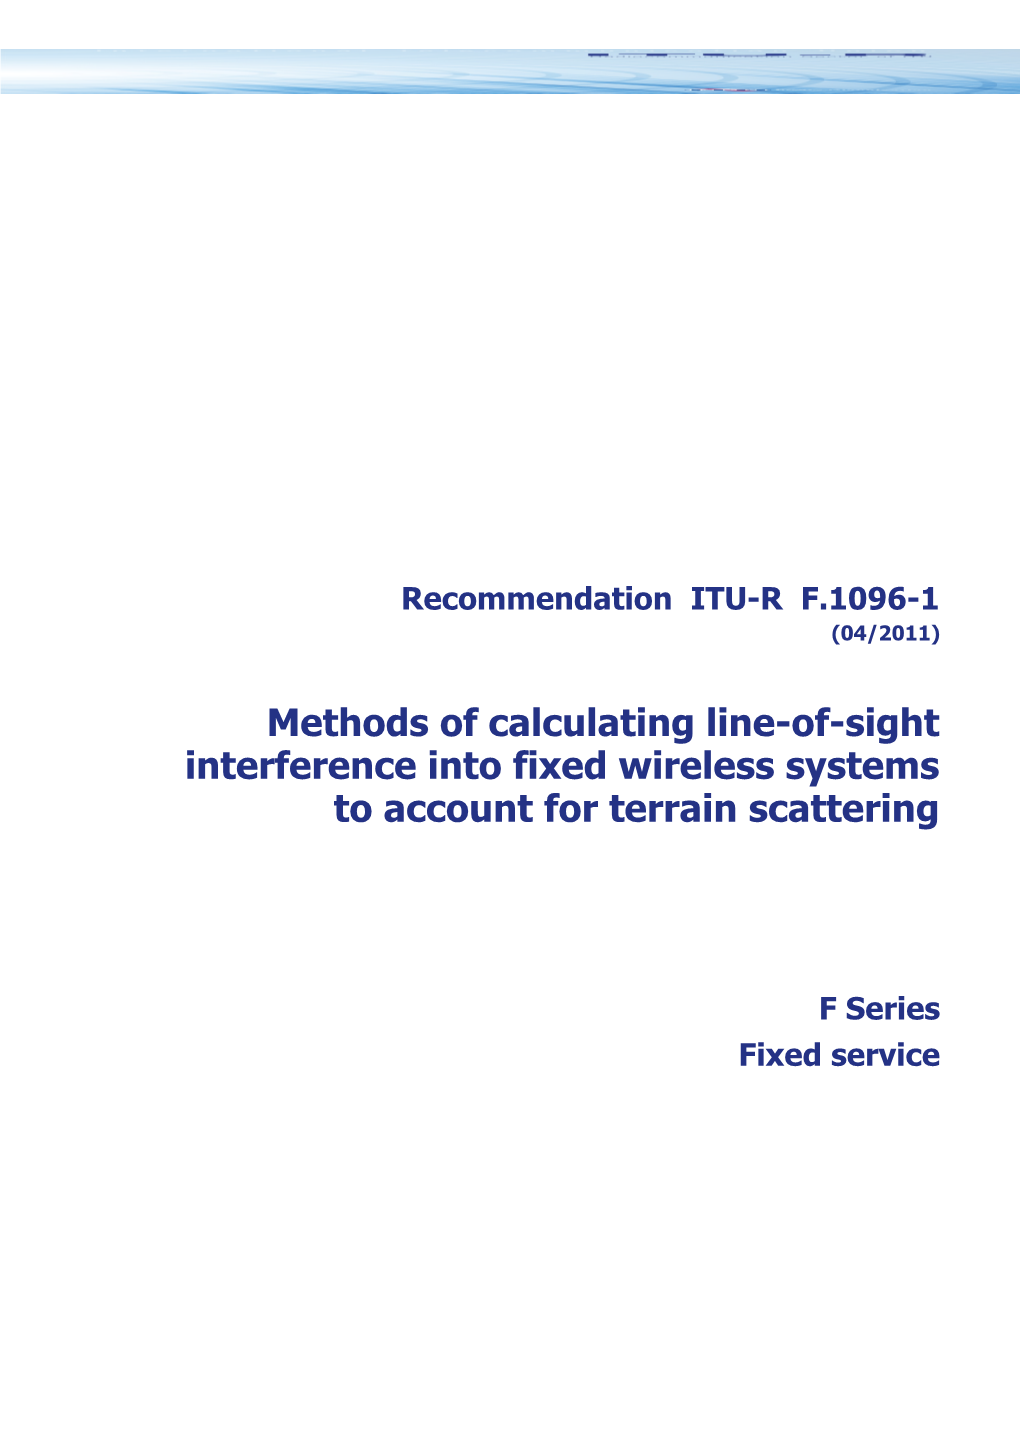 RECOMMENDATION ITU-R F.1096-1 - Methods of Calculating Line-Of-Sight Interference Into